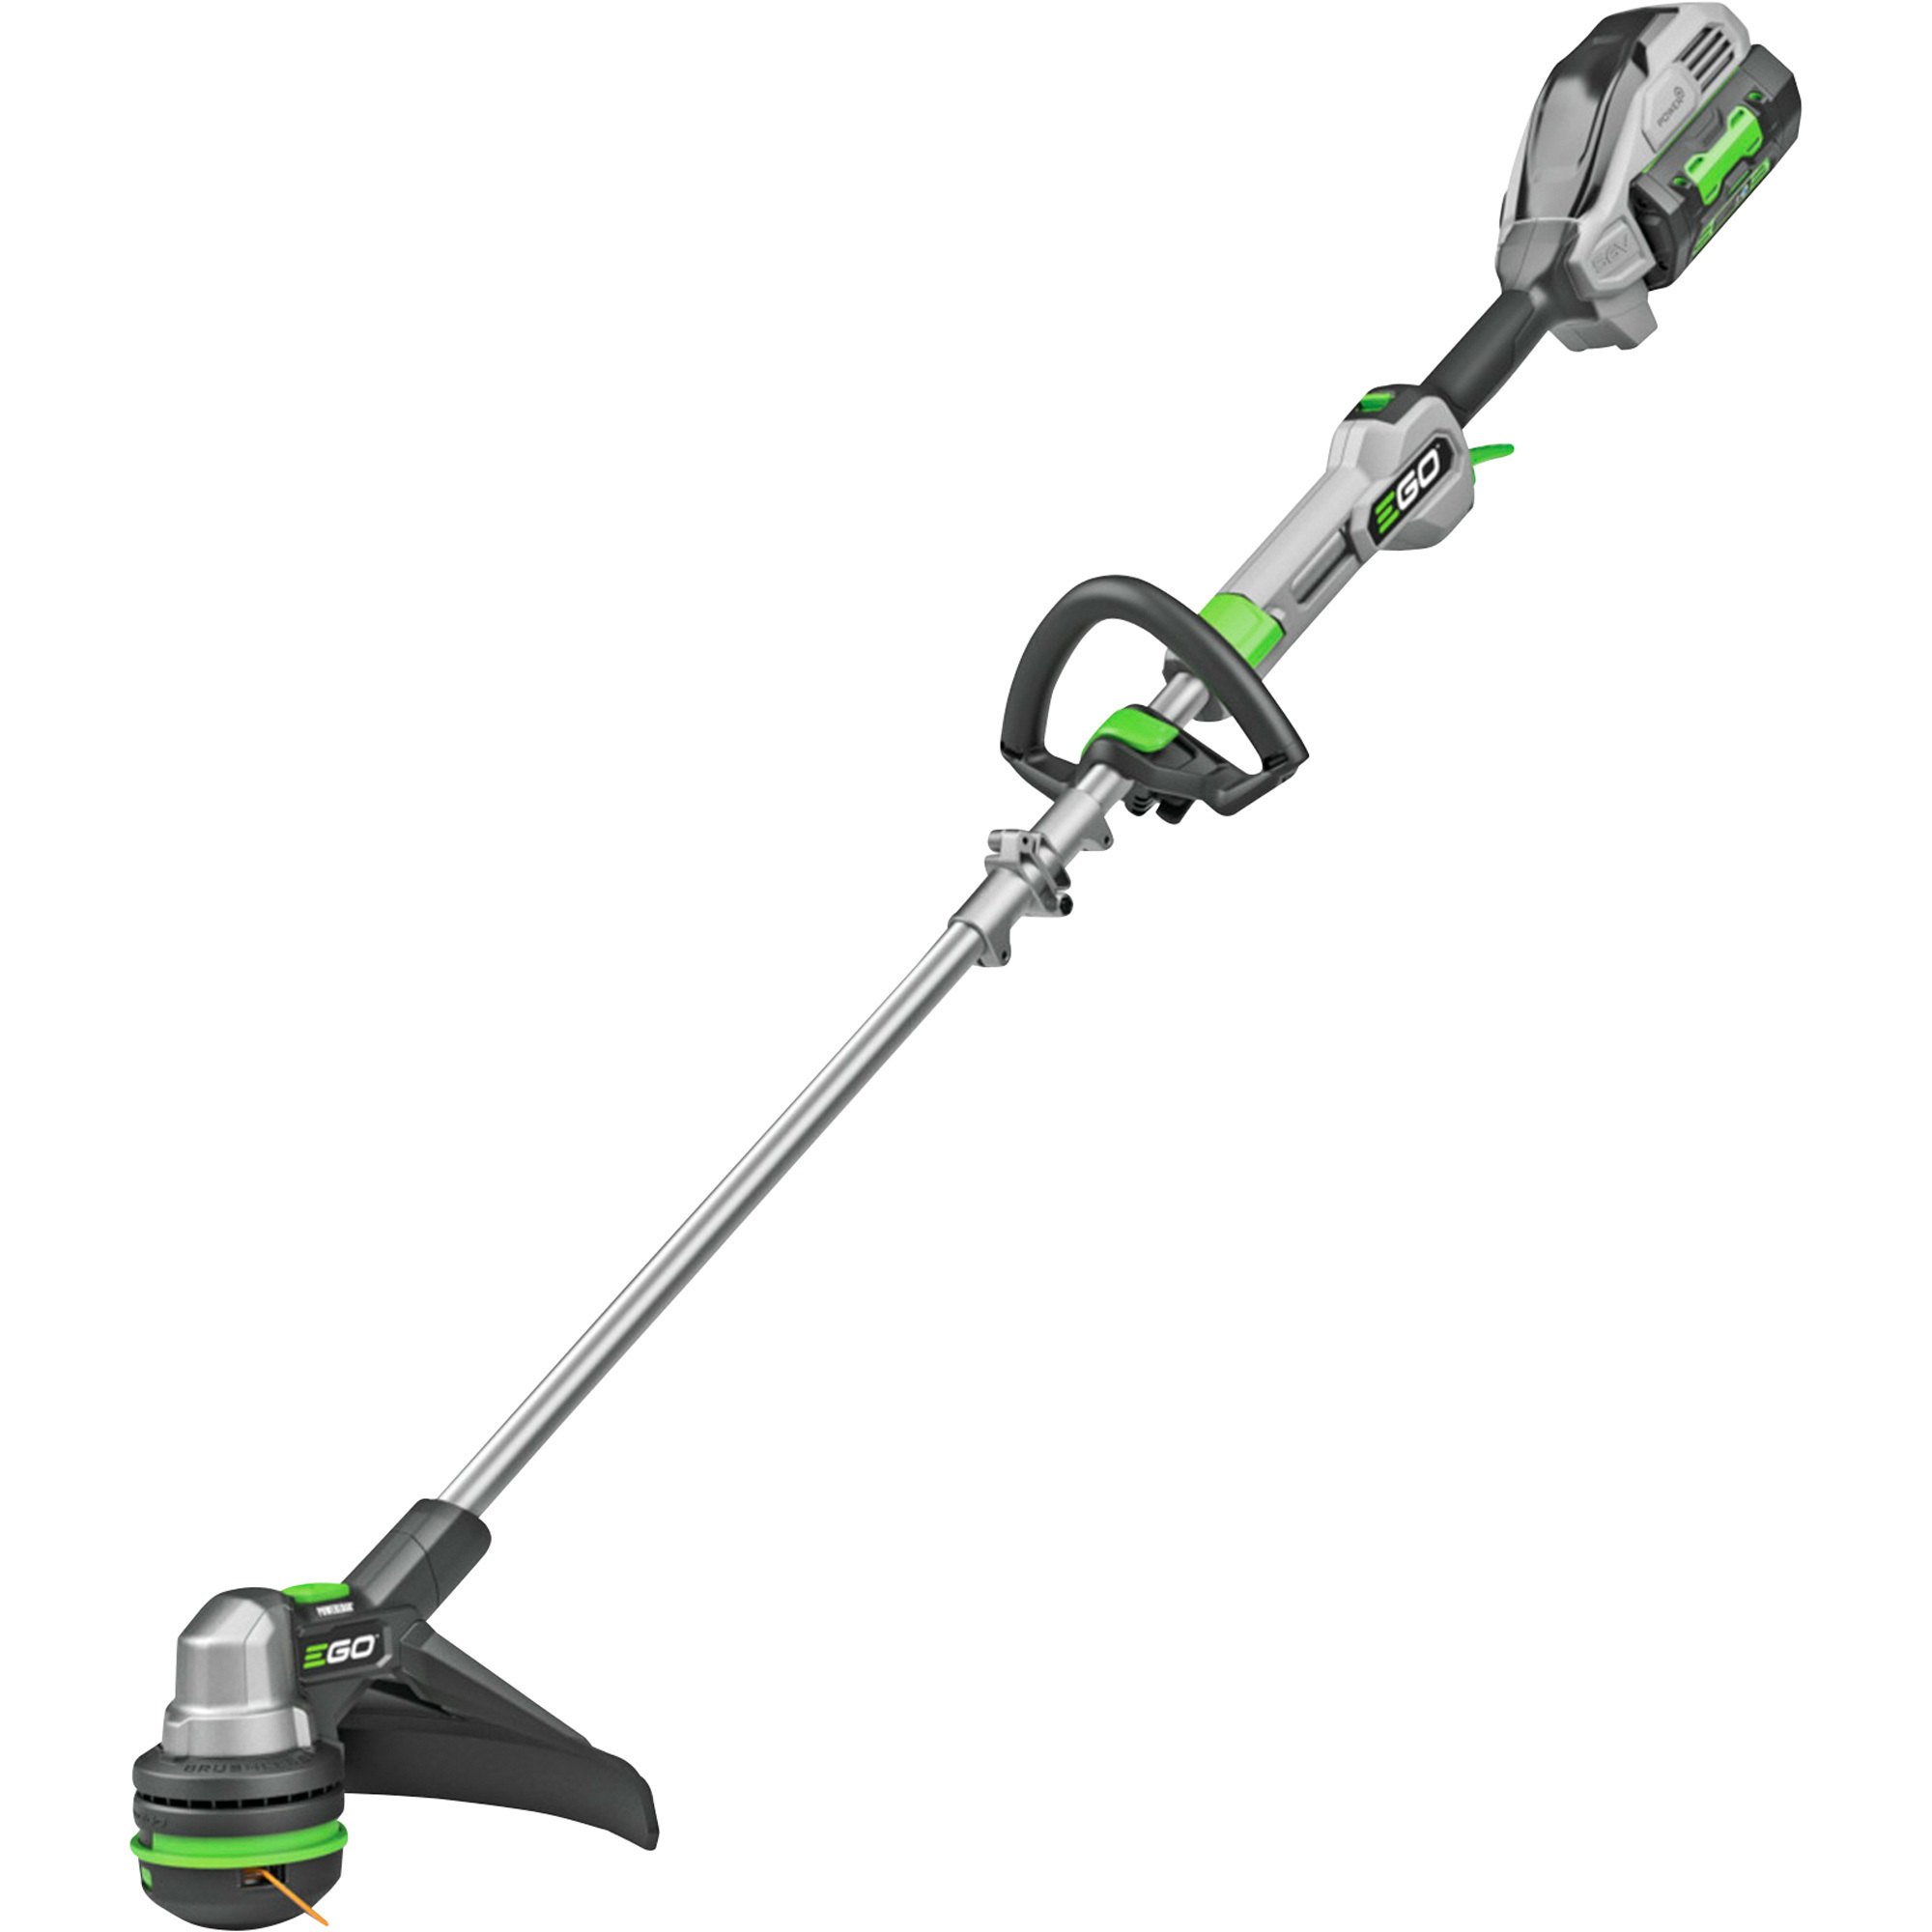 EGO 56V ARC Lithium Telescoping String Trimmer with POWERLOAD Technology, 15Inch Cutting Width, 2.5Ah, Model ST1511T